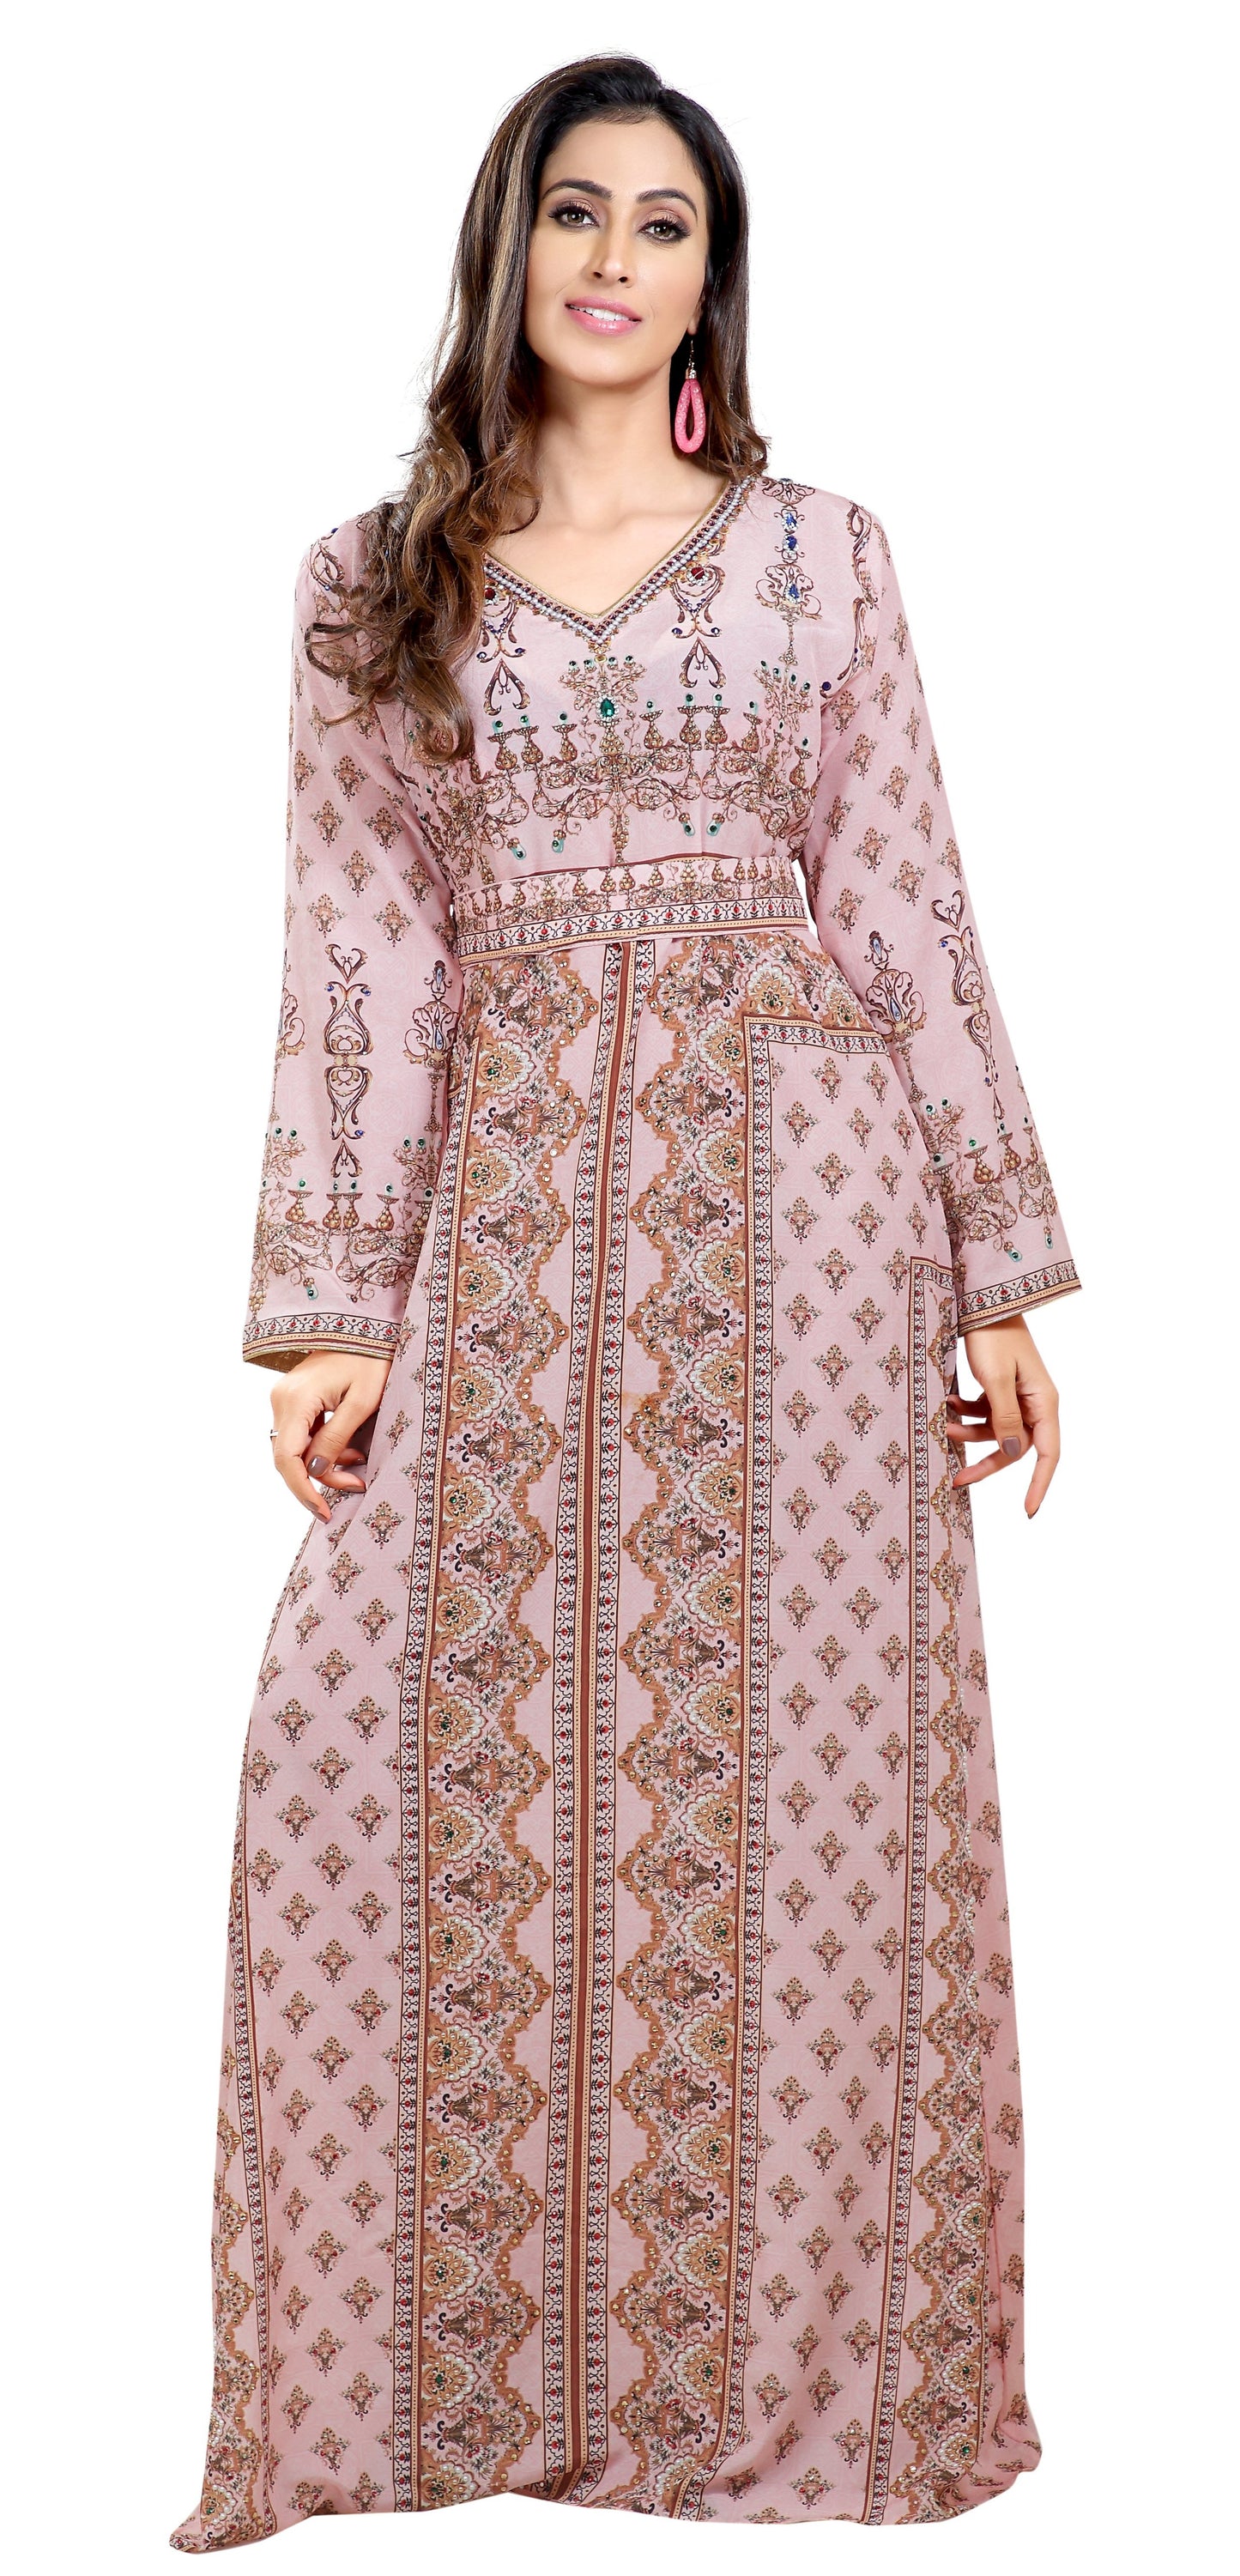 Light Pink Printed Kaftan with Green Embroidered Beads - Maxim Creation